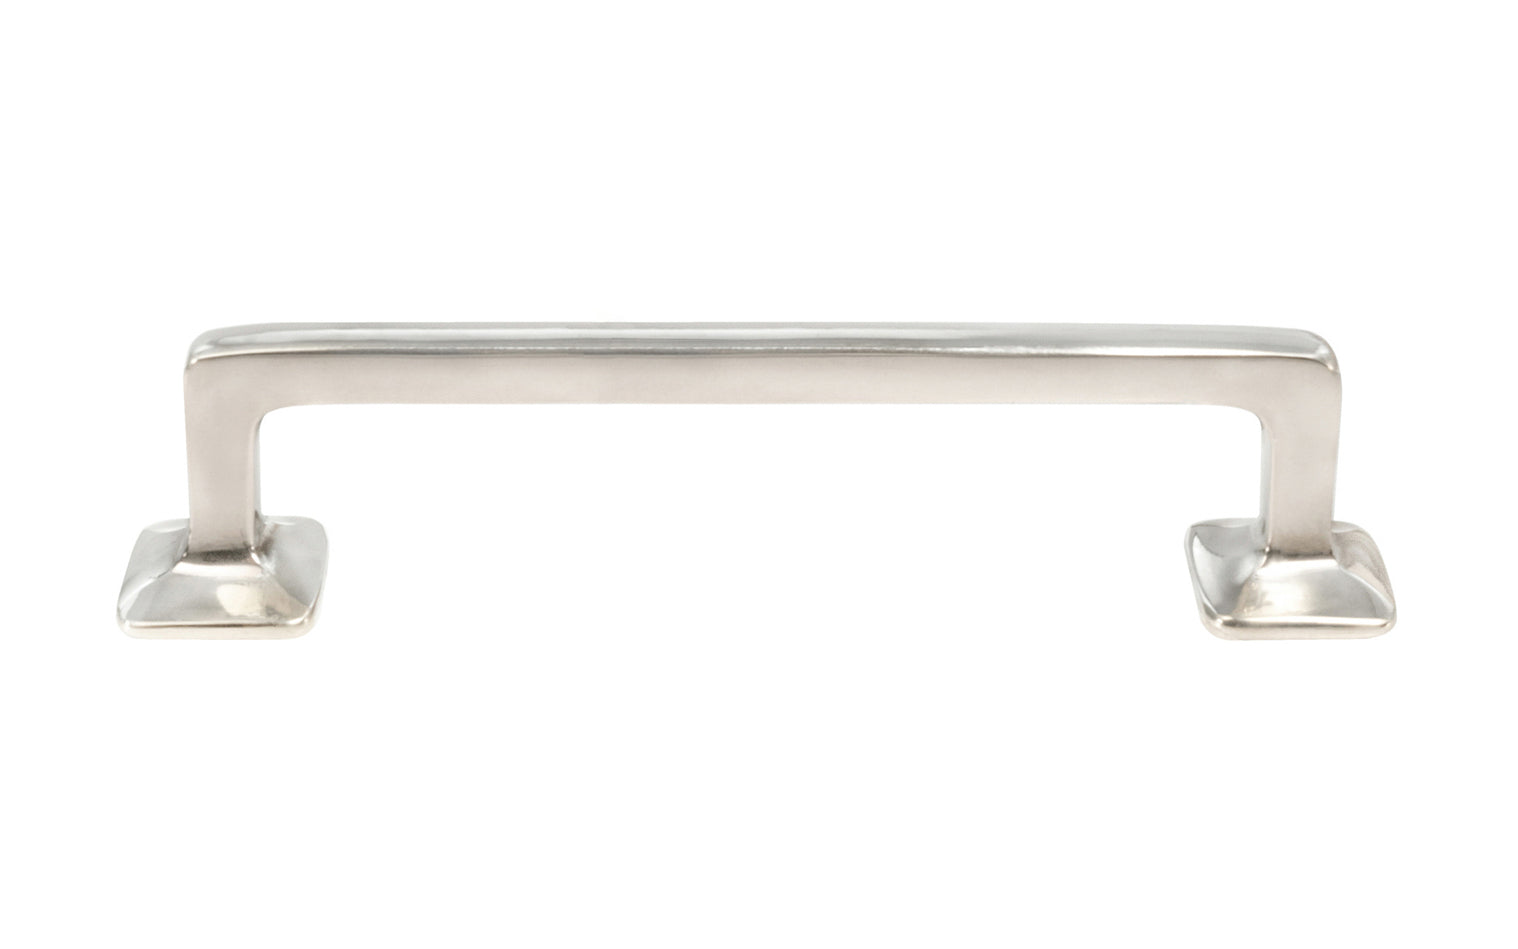 Vintage-style Hardware · Classic Solid Brass Handle Pull ~ 4" On Centers. Mission-Style / Arts & Crafts style. Polished nickel finish. 4" center to center pull. solid brass kitchen cabinet pull. Drawer pull handle. Authentic reproduction hardware.